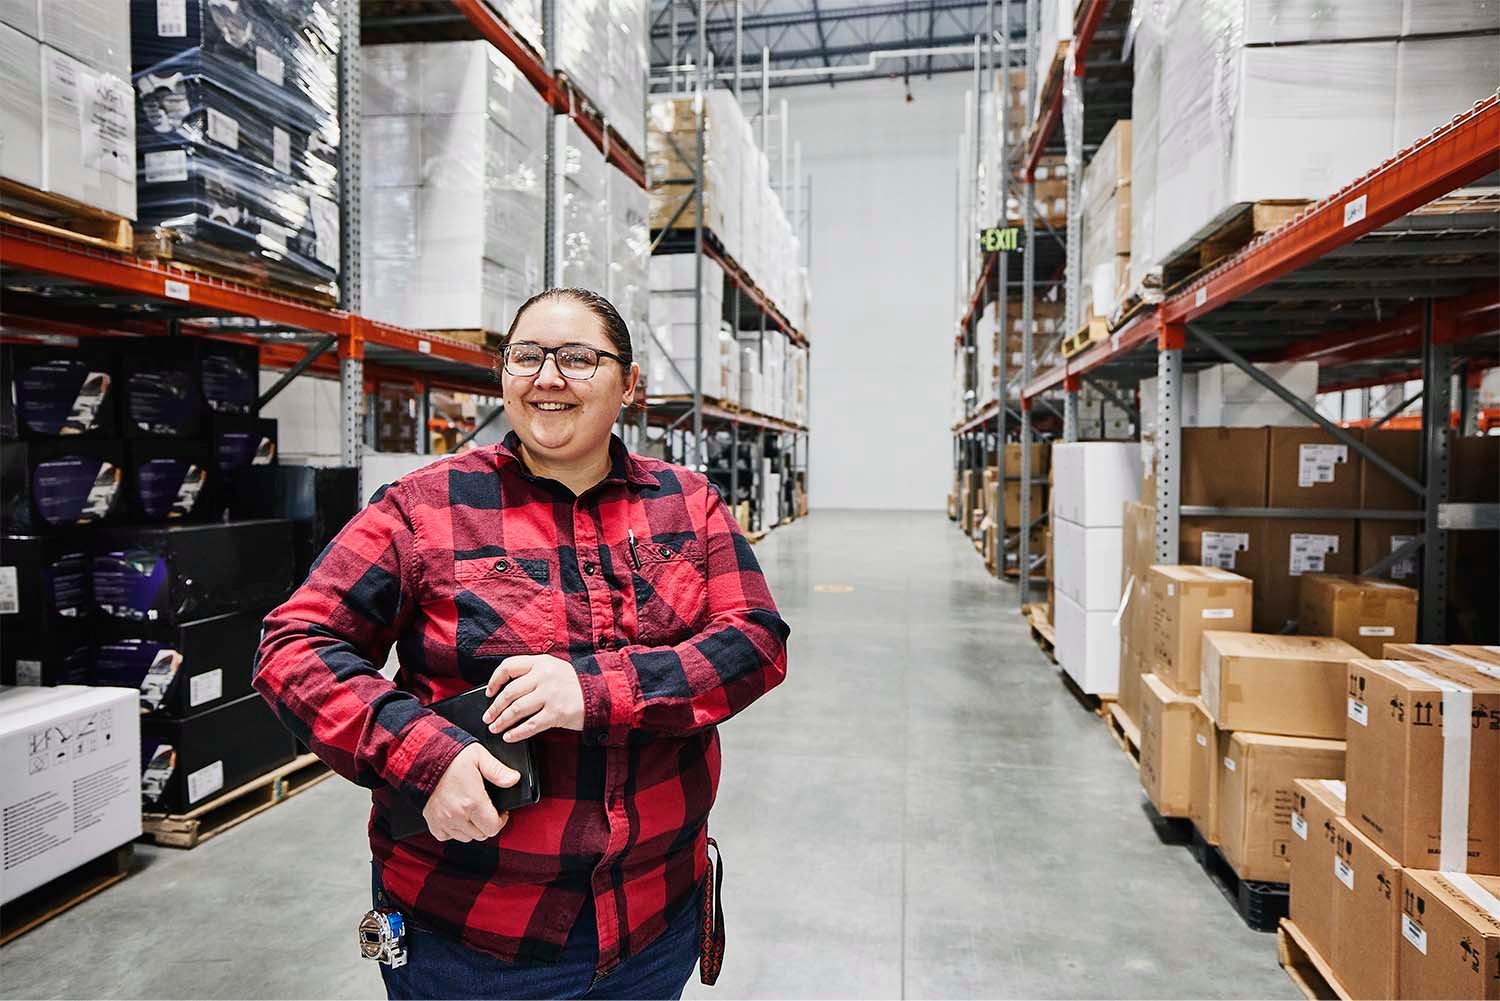 Smiling warehouse worker in a storage aisle